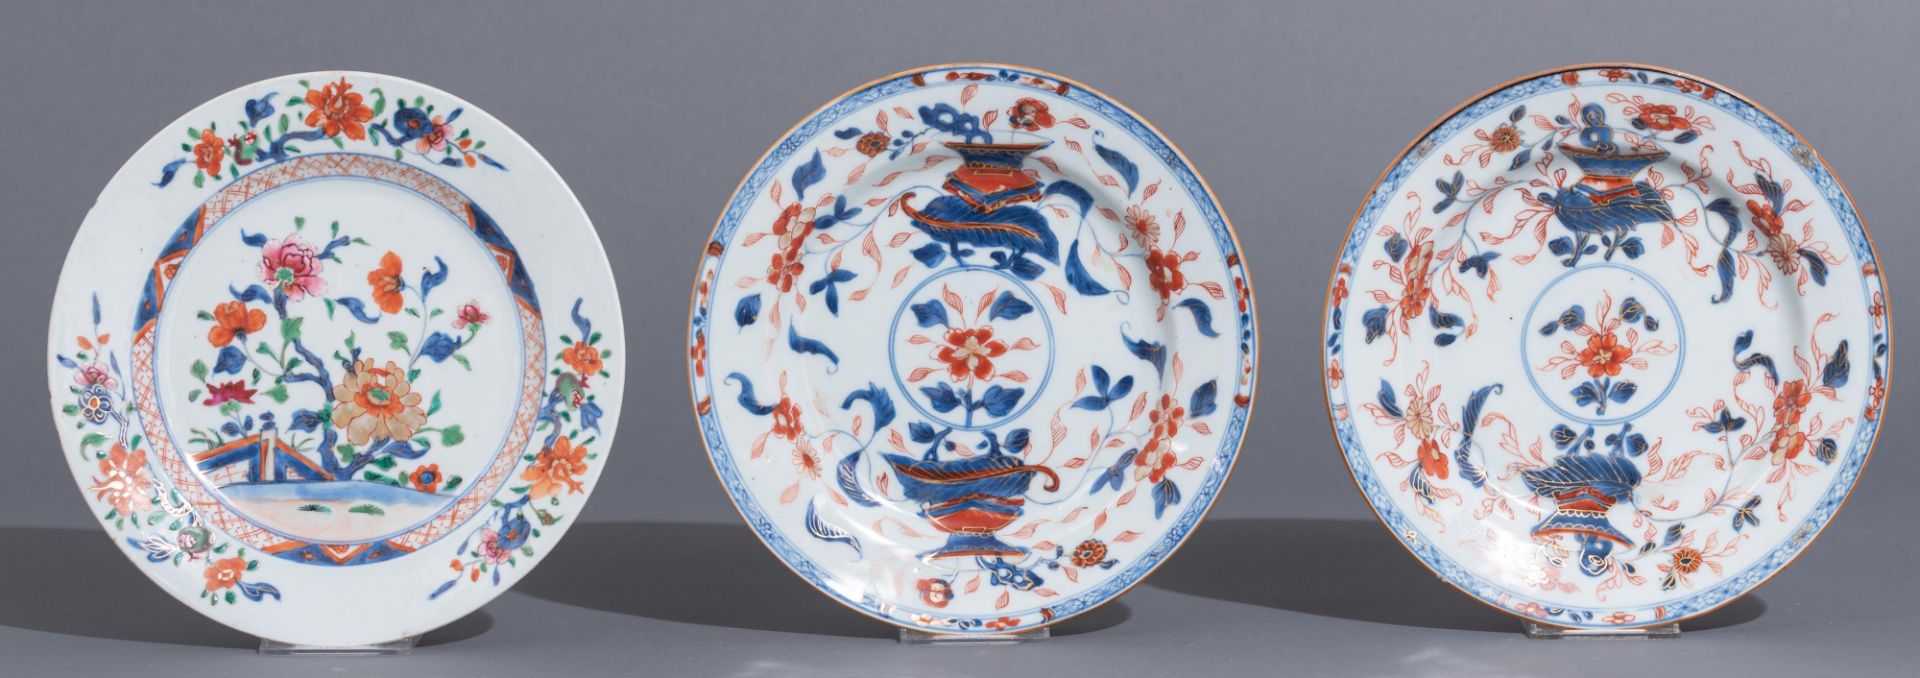 A collection of Chinese and Japanese porcelain items, 18th / 19th / 20thC, H 4 - 47 - ø 10,5 - 23 cm - Image 14 of 19